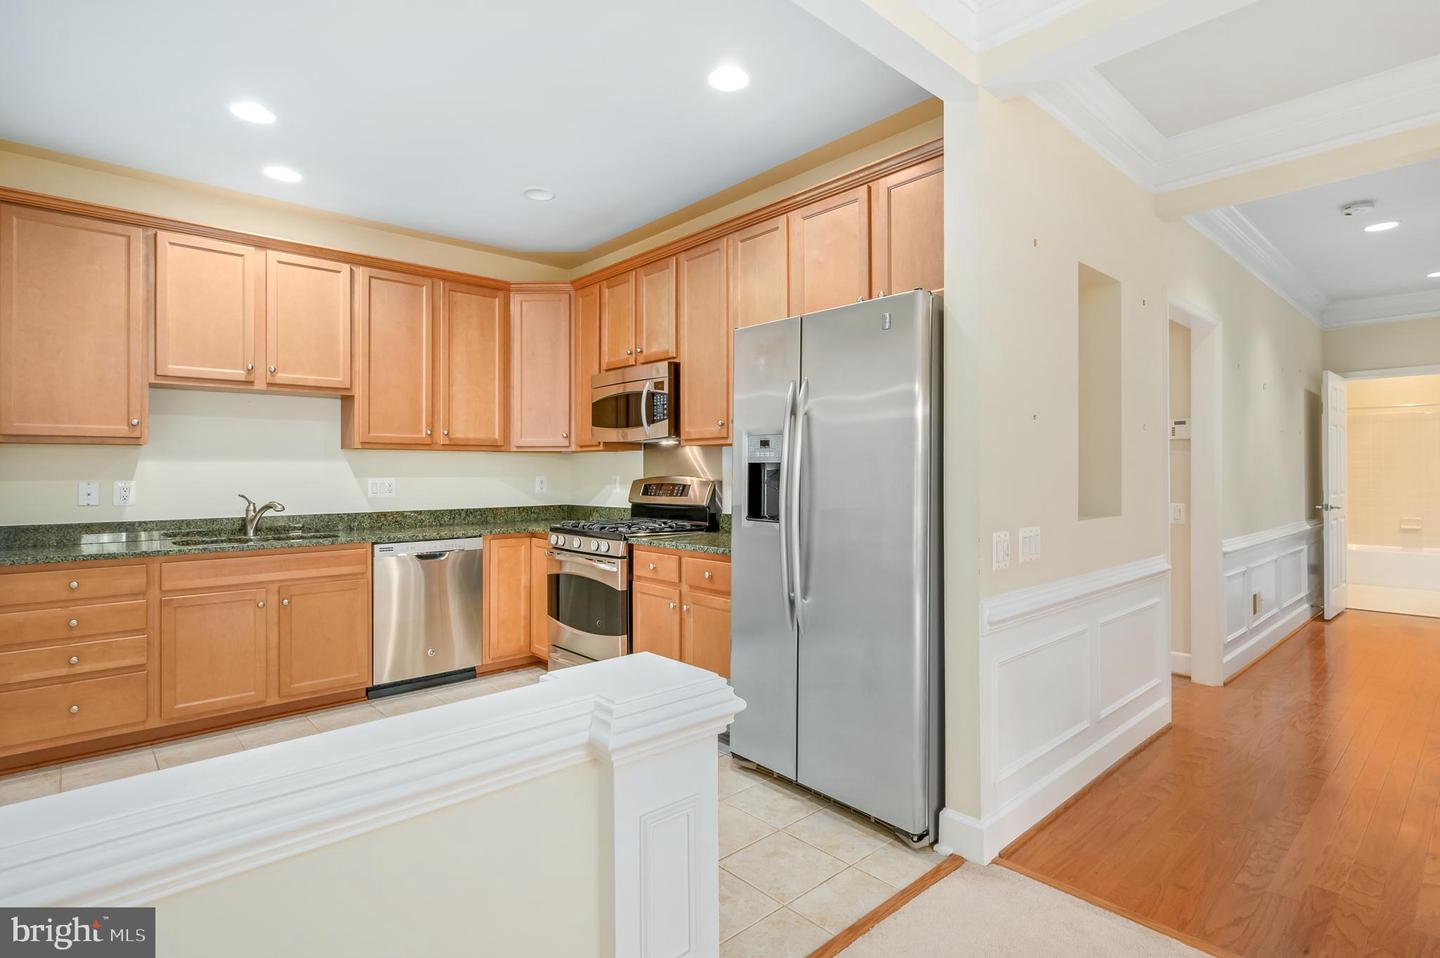 44396 SUNSET MAPLE DR, ASHBURN, Virginia 20147, 2 Bedrooms Bedrooms, ,2 BathroomsBathrooms,Residential,For sale,44396 SUNSET MAPLE DR,VALO2067550 MLS # VALO2067550